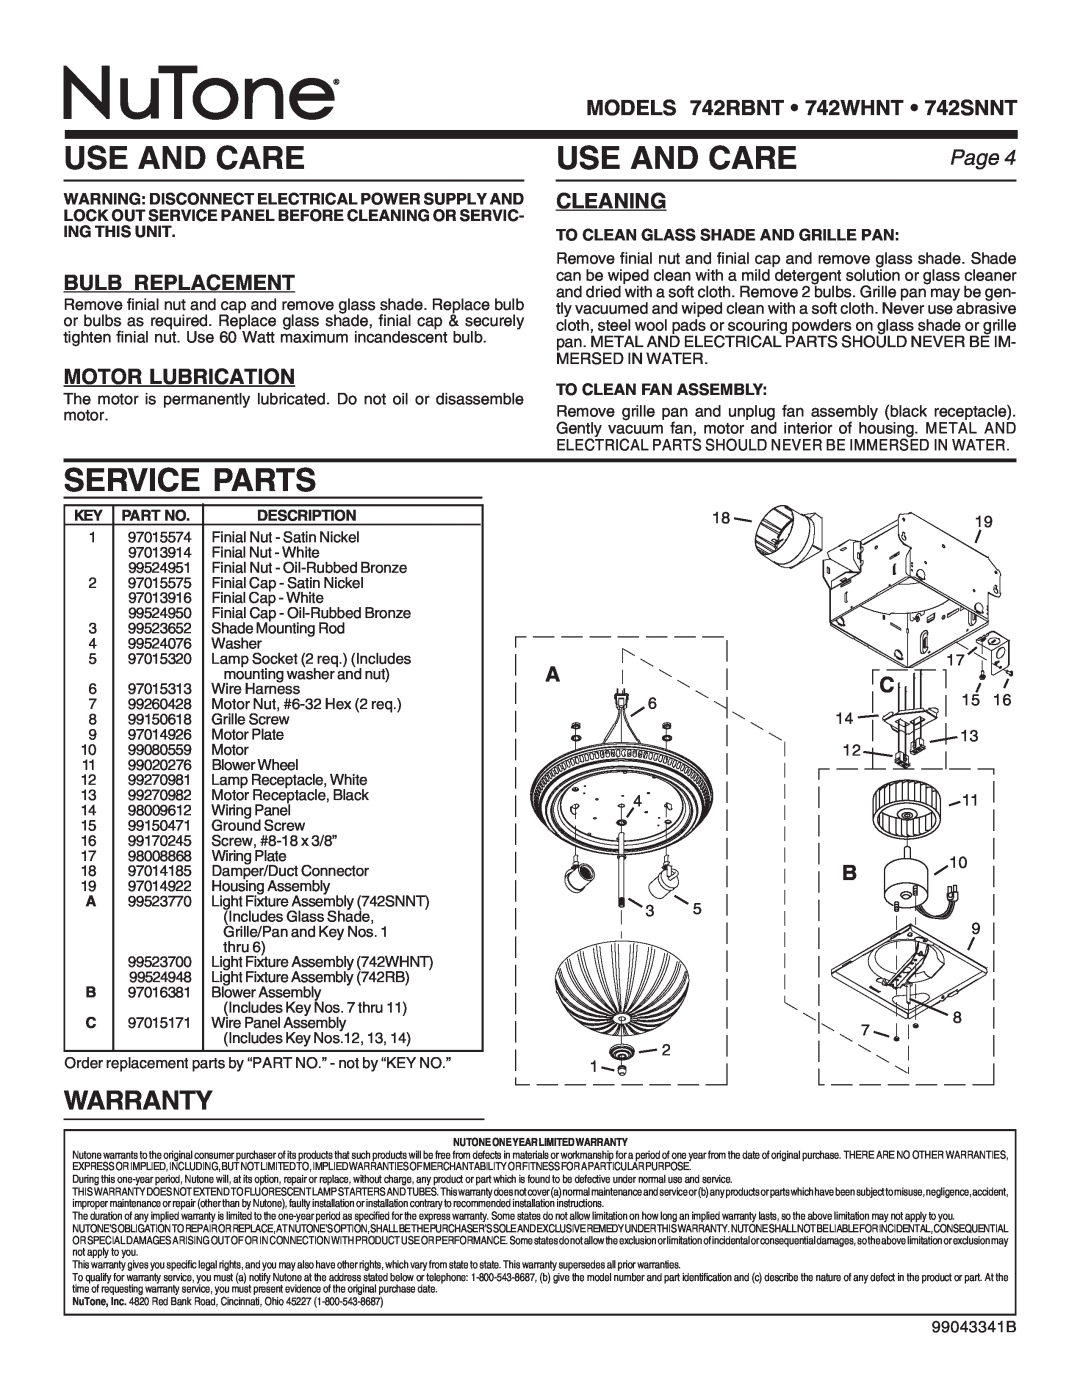 NuTone 742RBNT Use And Care, Service Parts, Warranty, Bulb Replacement, Motor Lubrication, Cleaning, Page, Description 